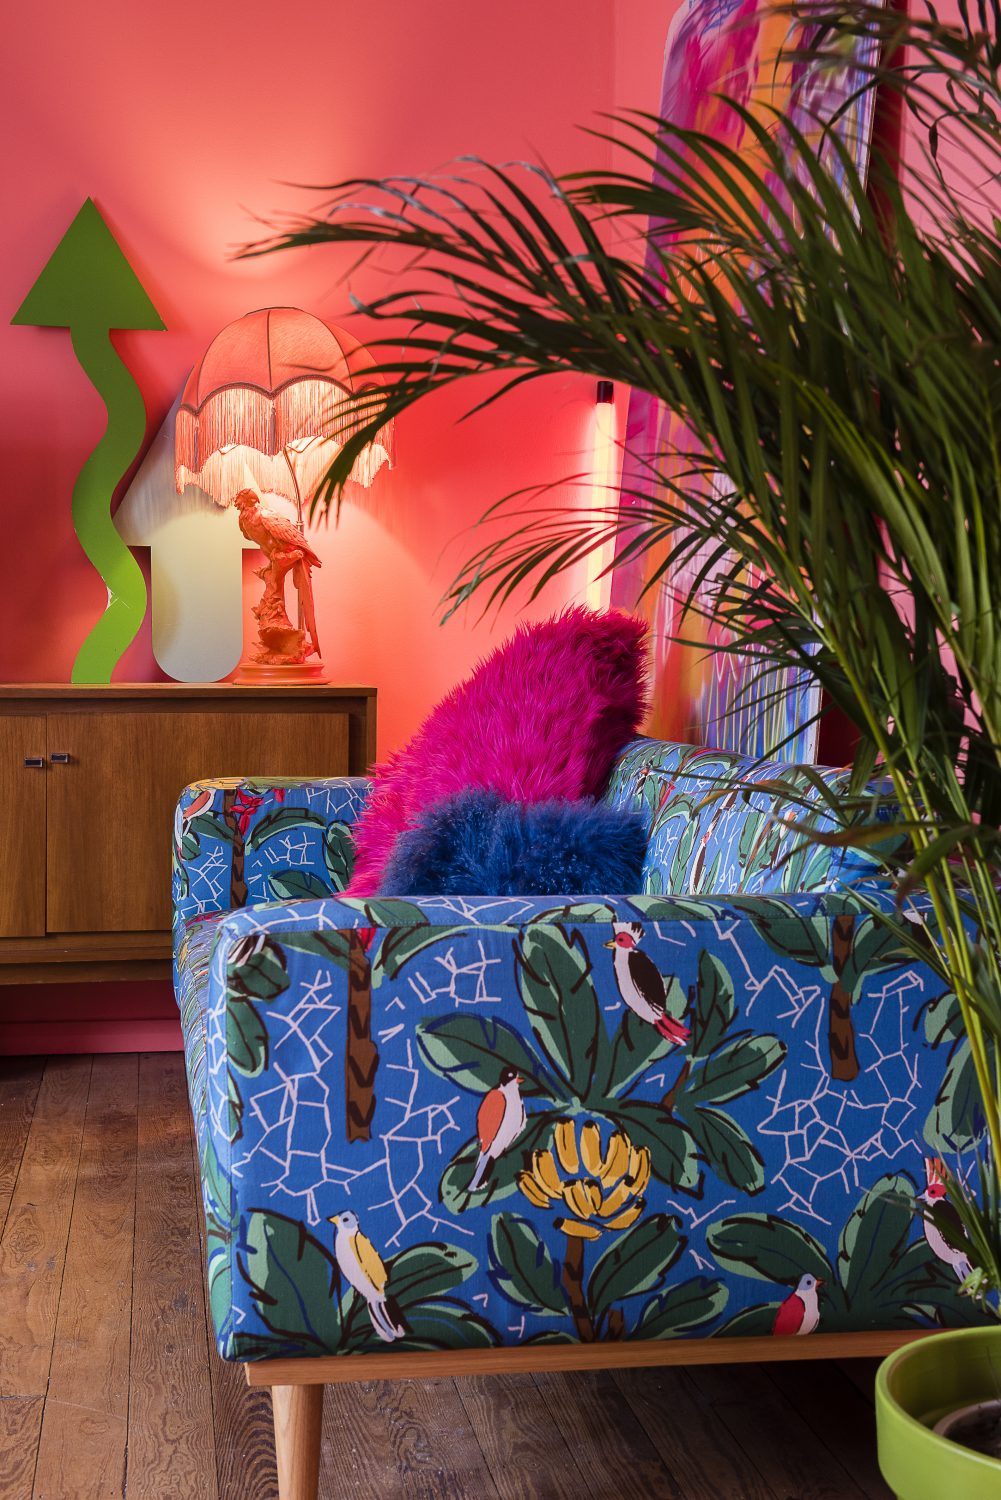 Tropical birds and foliage feature on the upholstery of another sofa, alongside a neon light and a large spray-painted canvas which rests against one wall